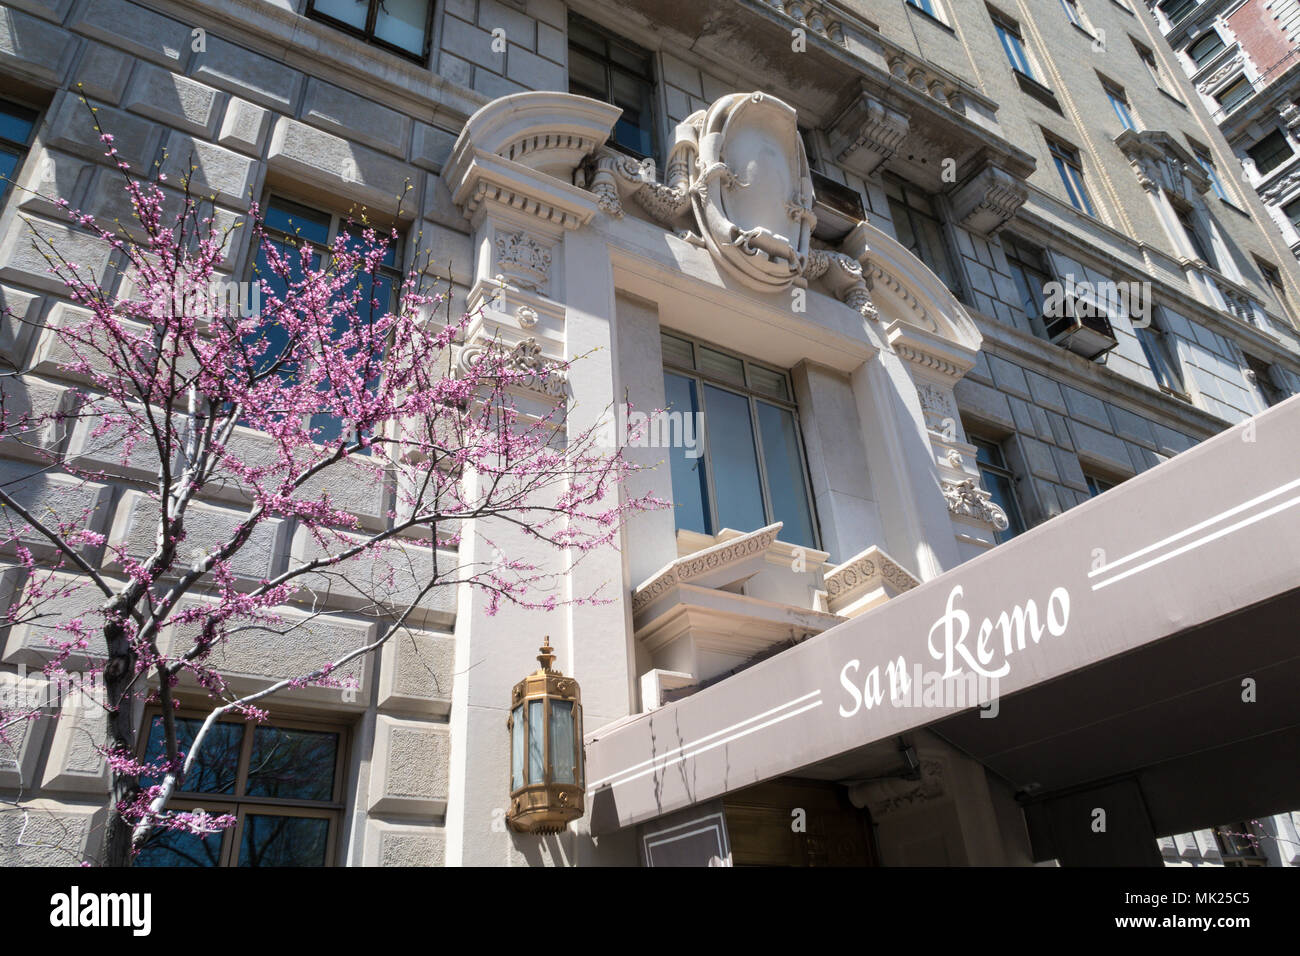 San Remo, 145 Central Park West, NYC Stockfoto